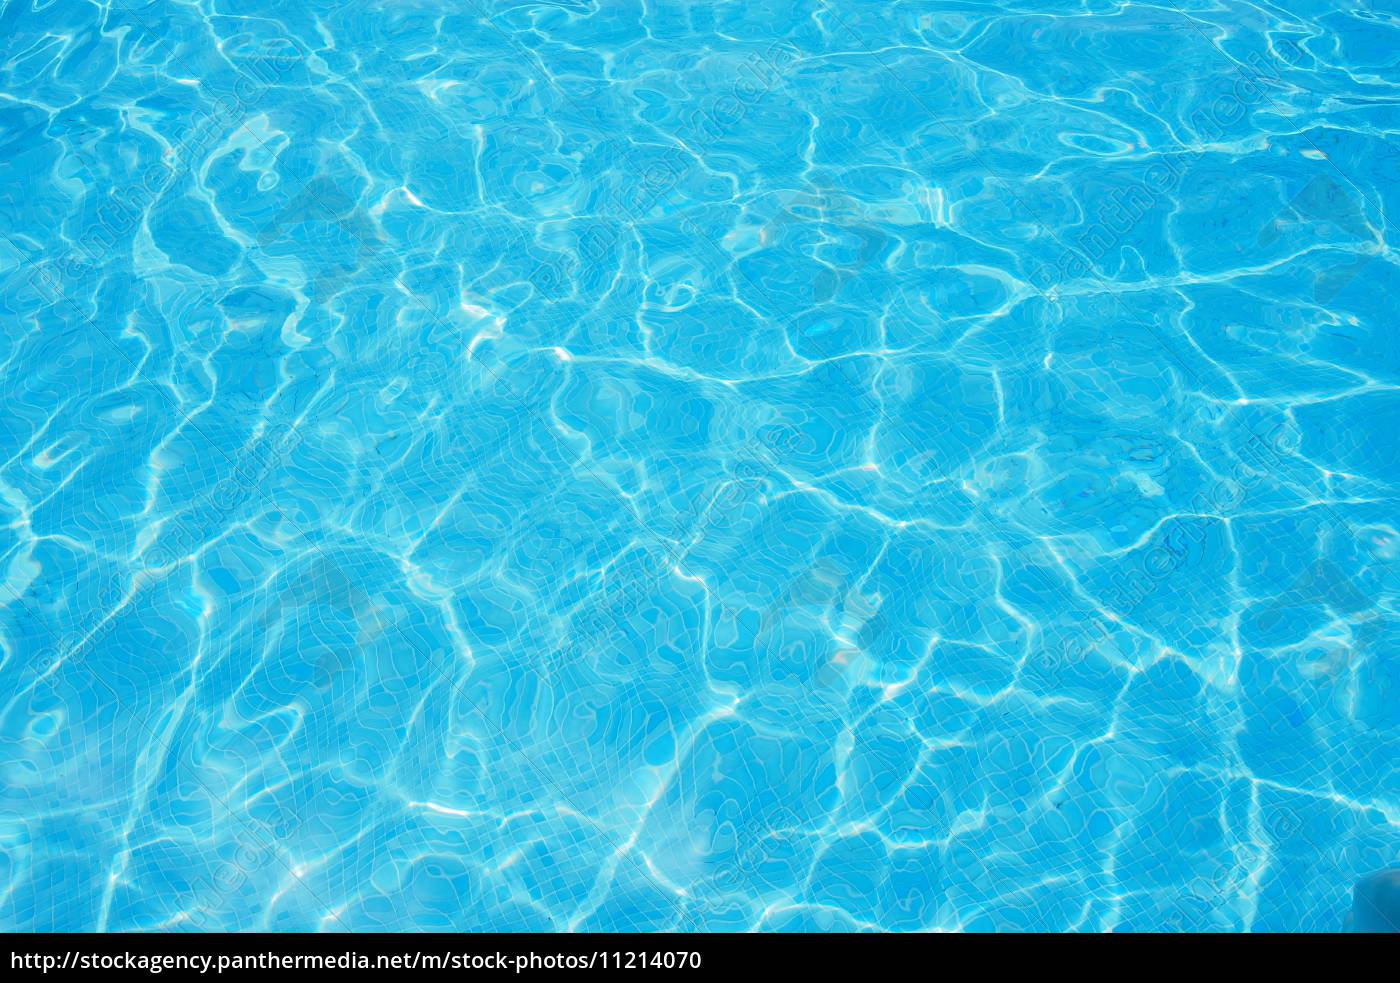 Swimming Pool Crystal Clear Water Stock Image 11214070